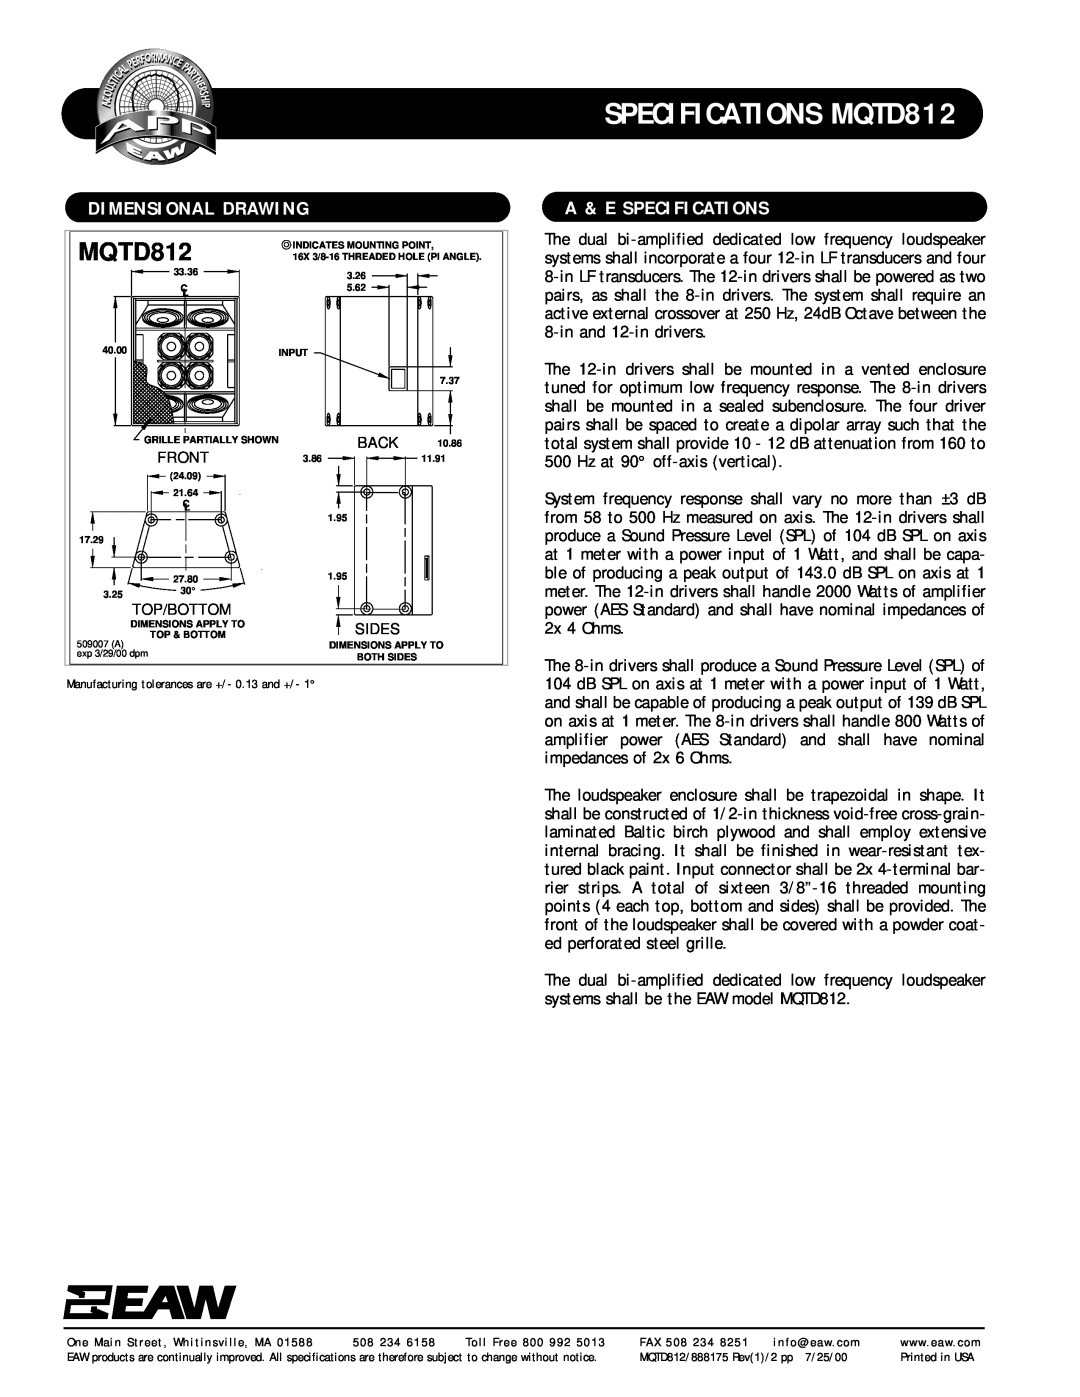 EAW specifications Dimensional Drawing, A & E Specifications, SPECIFICATIONS MQTD812 